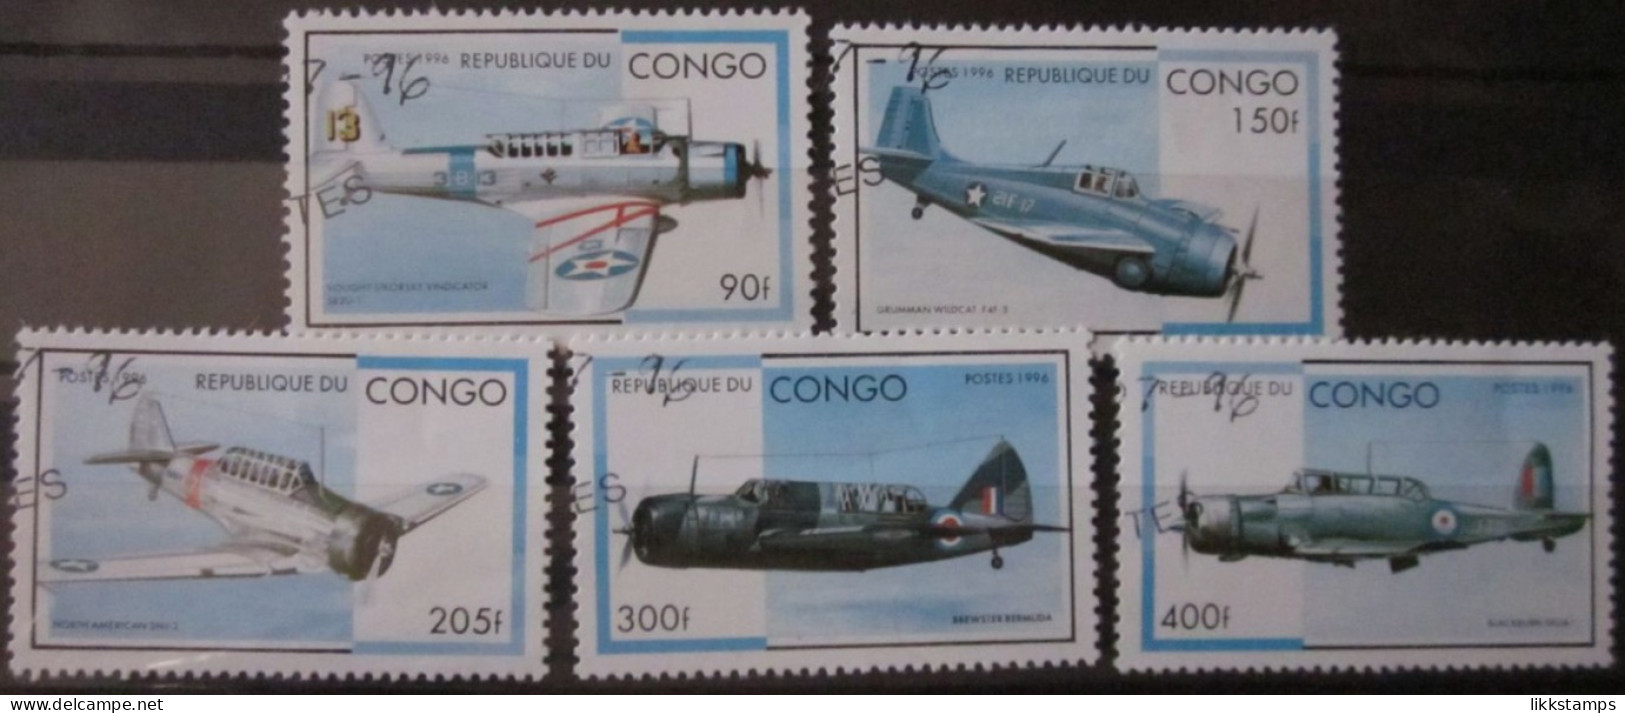 CONGO 24/06/1996 ~ MILITARY AIRCRAFT OF WWII. ~  VFU #03112 - Oblitérés